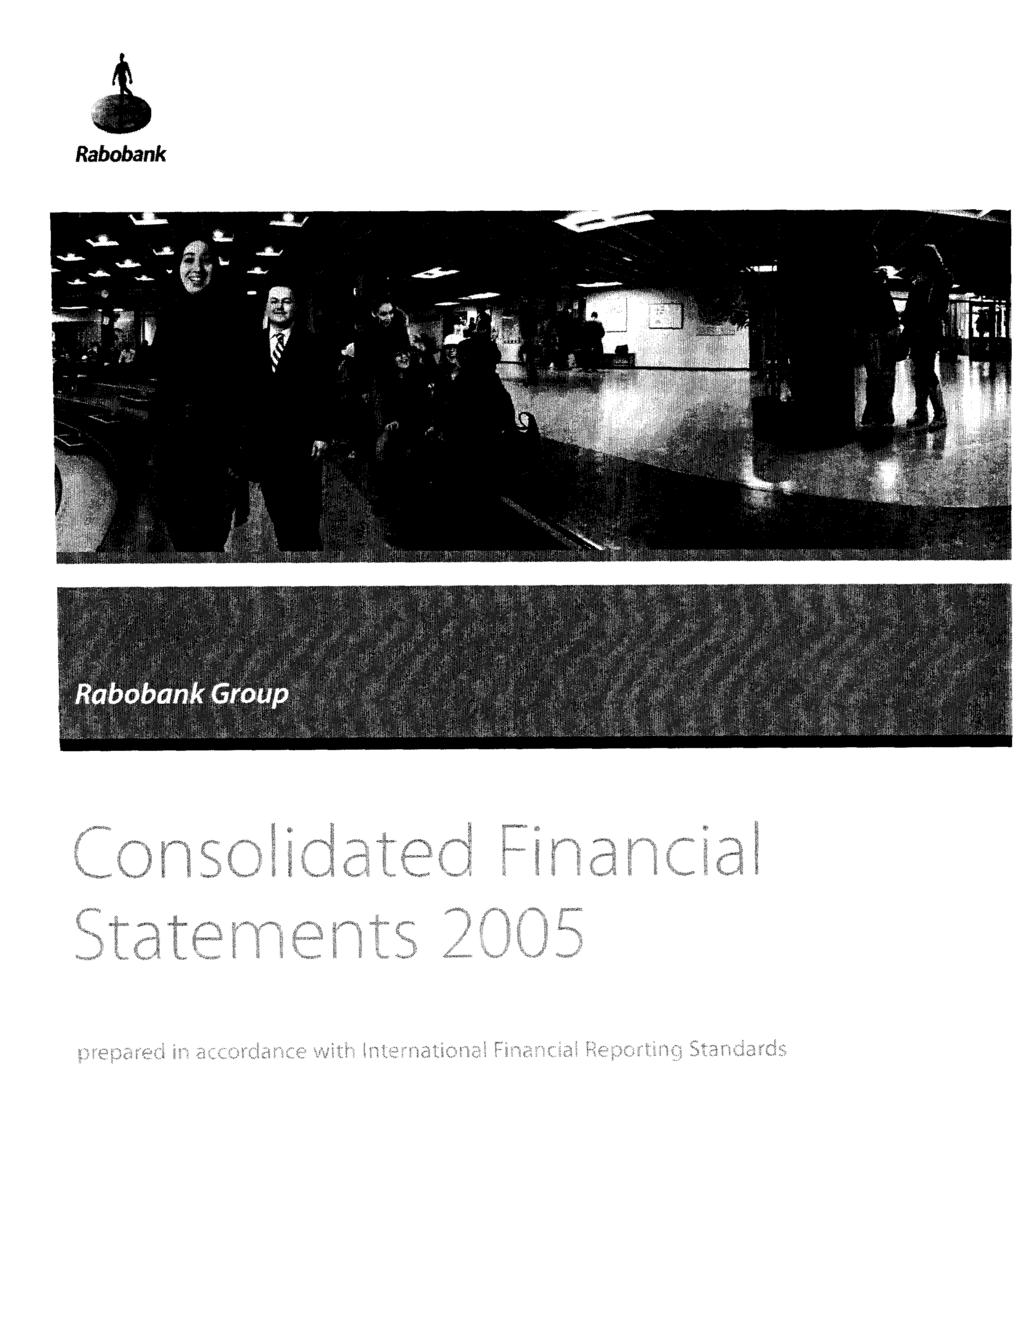 Rabobank Rabobank Group Consolidated Financial Statements 2005